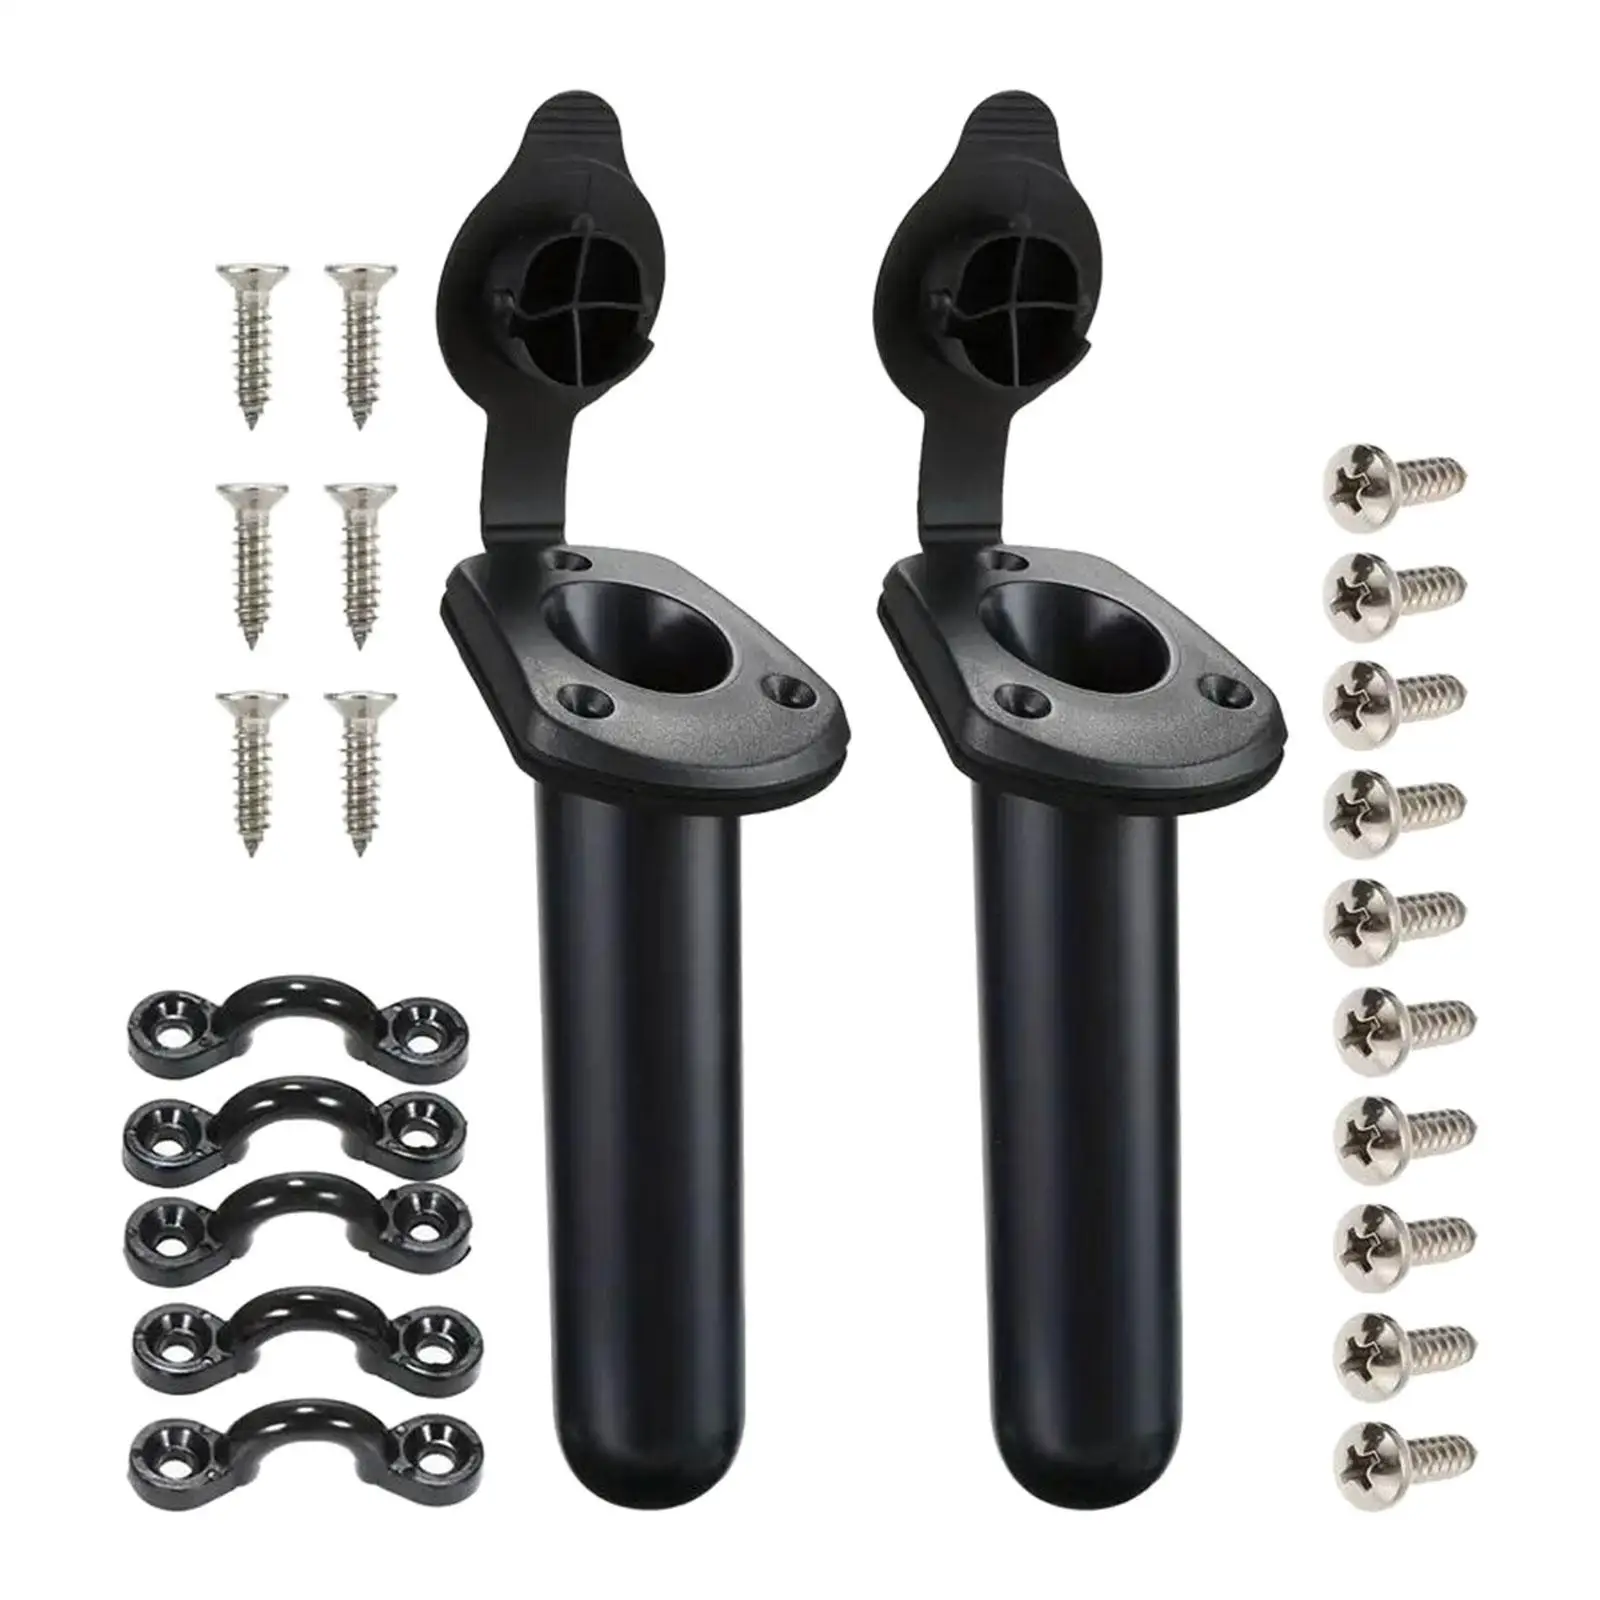 Kayak Fishing Rod Holder Easy Installation Repair Parts Replaces Fishing Tackle Accessory Tool for Canoe Kayak Fishing Boat